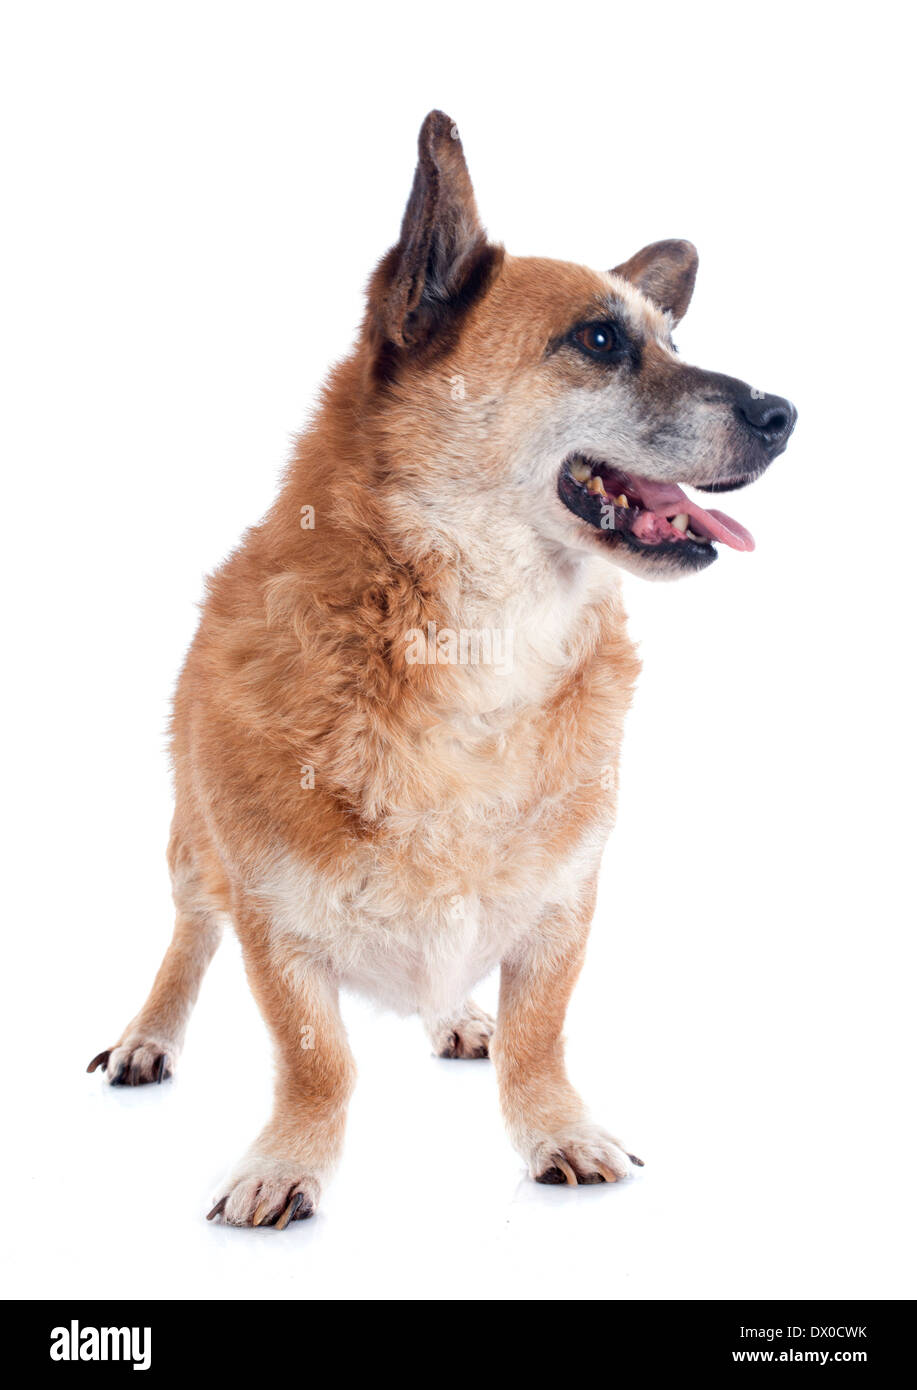 Welsh Corgi in front of white background Banque D'Images